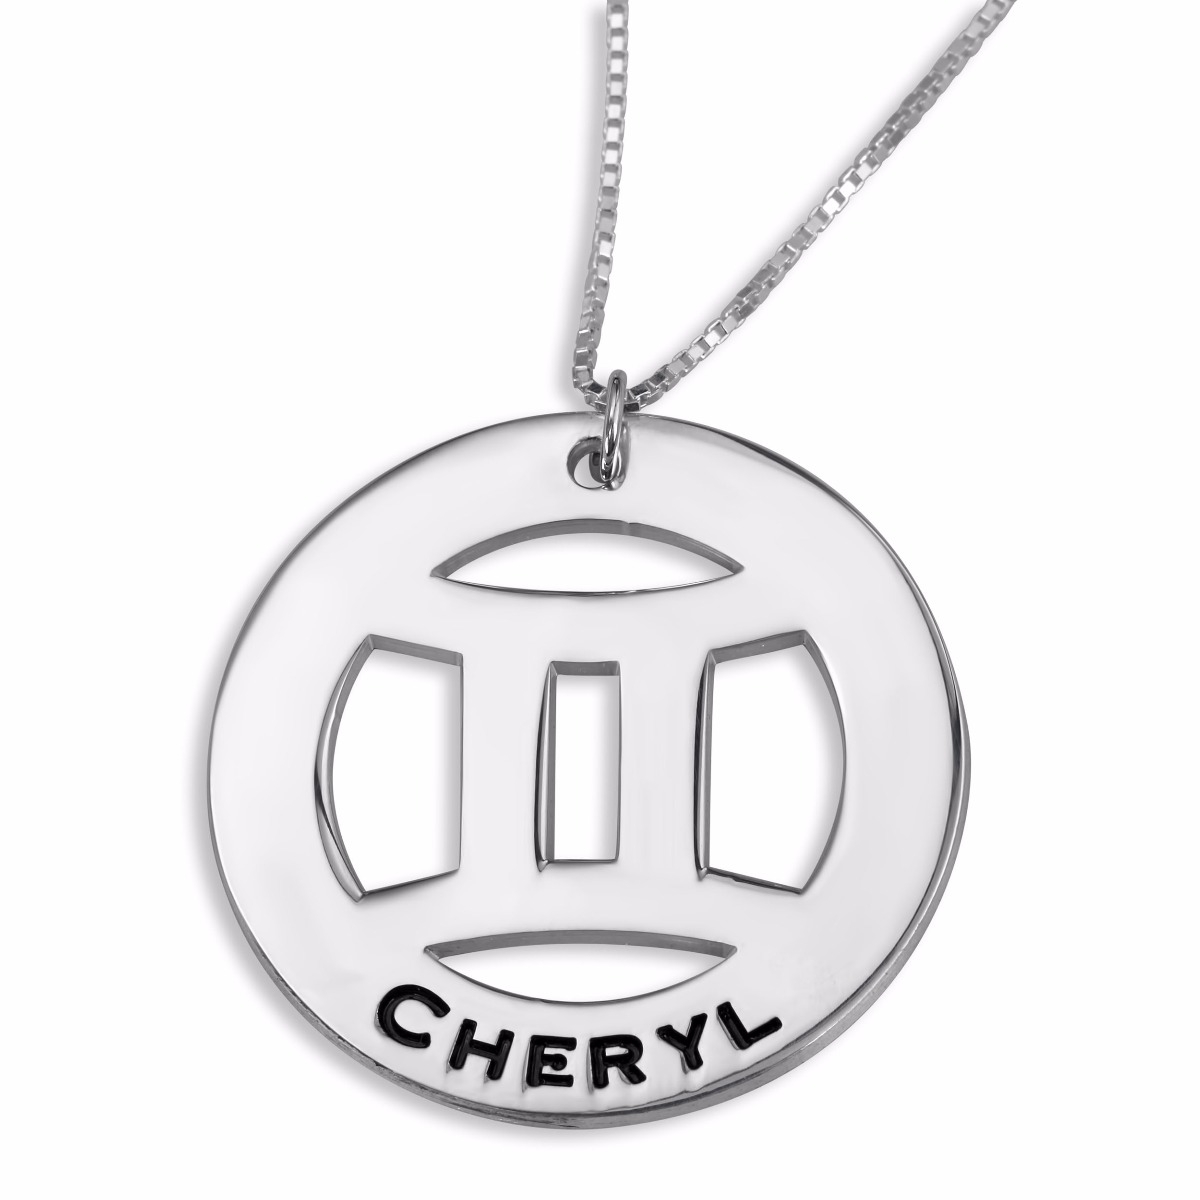 Hebrew Name Necklace Double Thickness Silver Gemini Zodiac Name Necklace (English/Hebrew) - 1